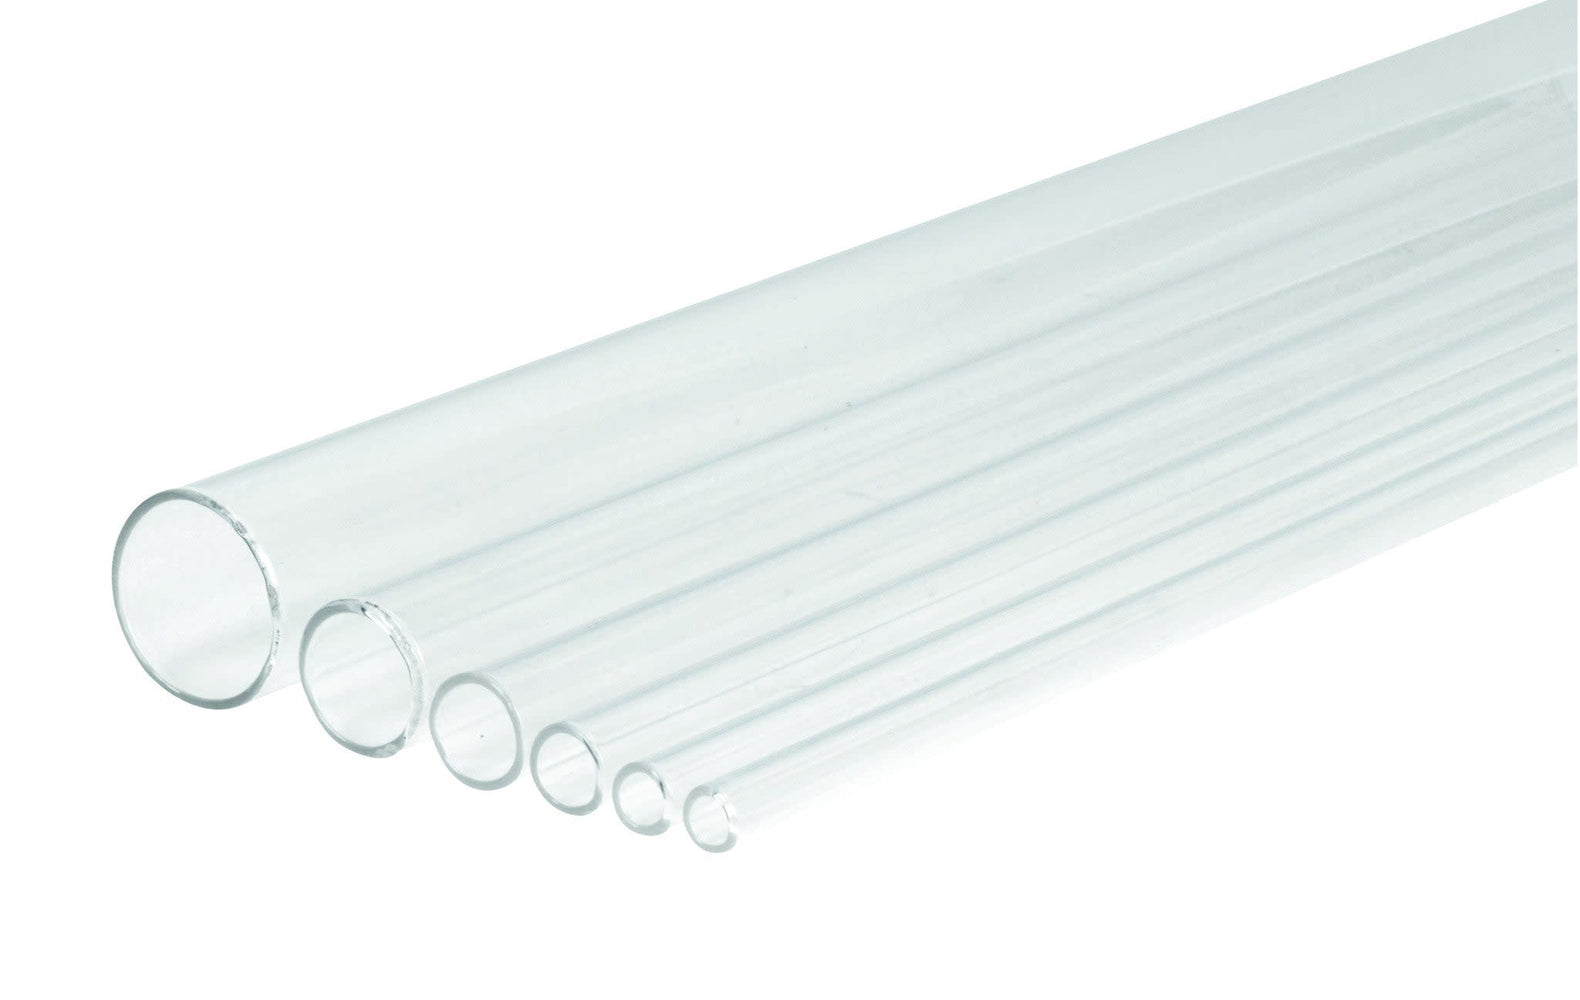 Tubing Neutral Glass, 15mm (Discontinued)